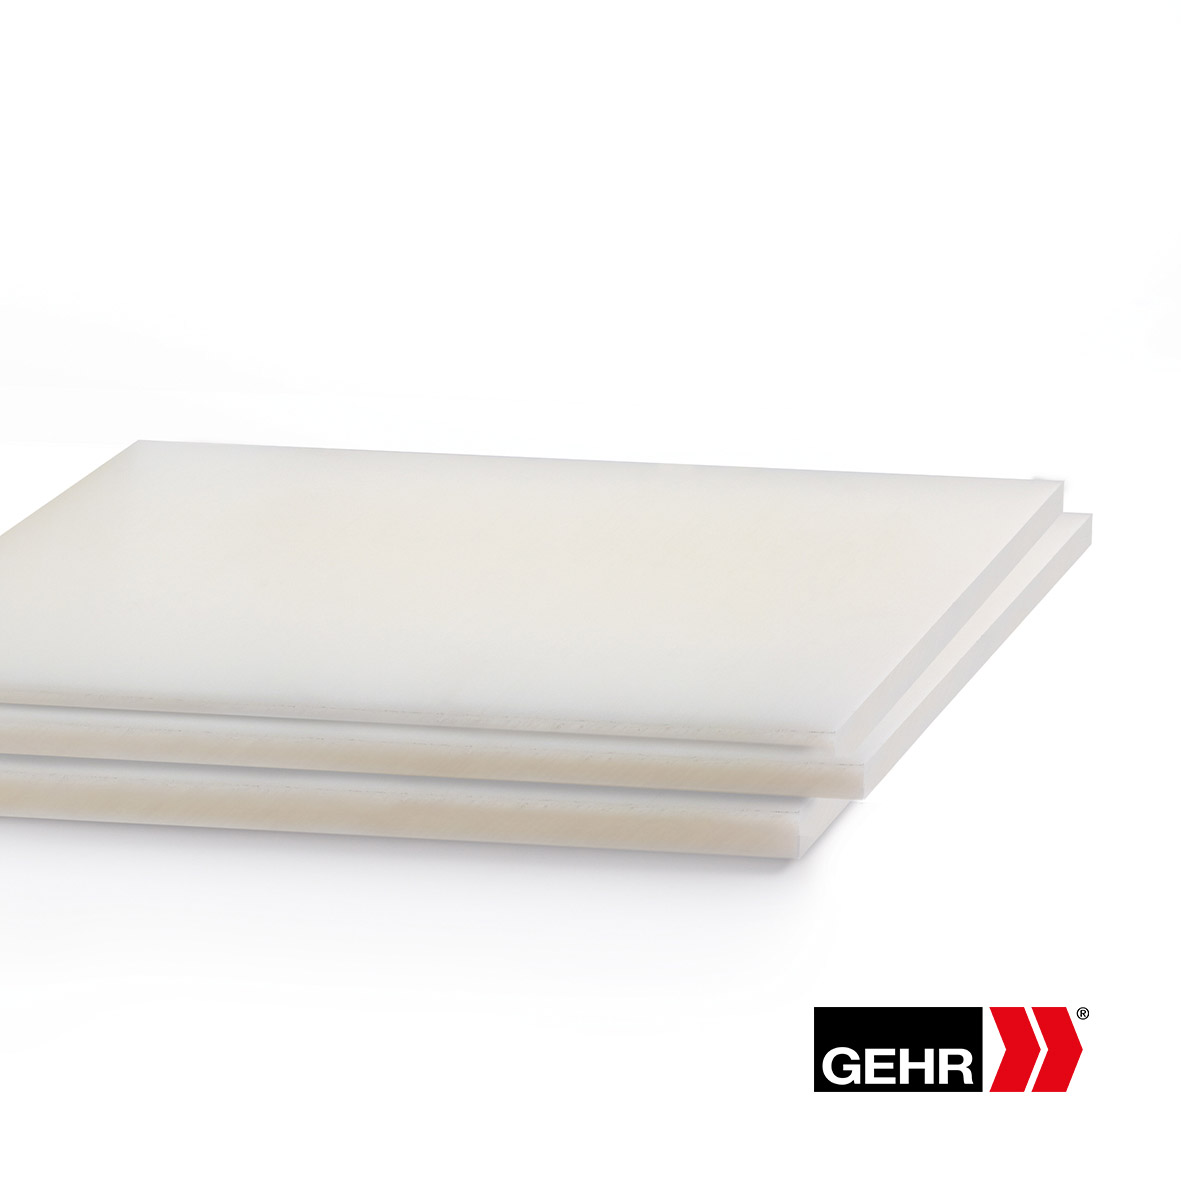 GEHR POM-C Sheets 1000 x 12 mm natural